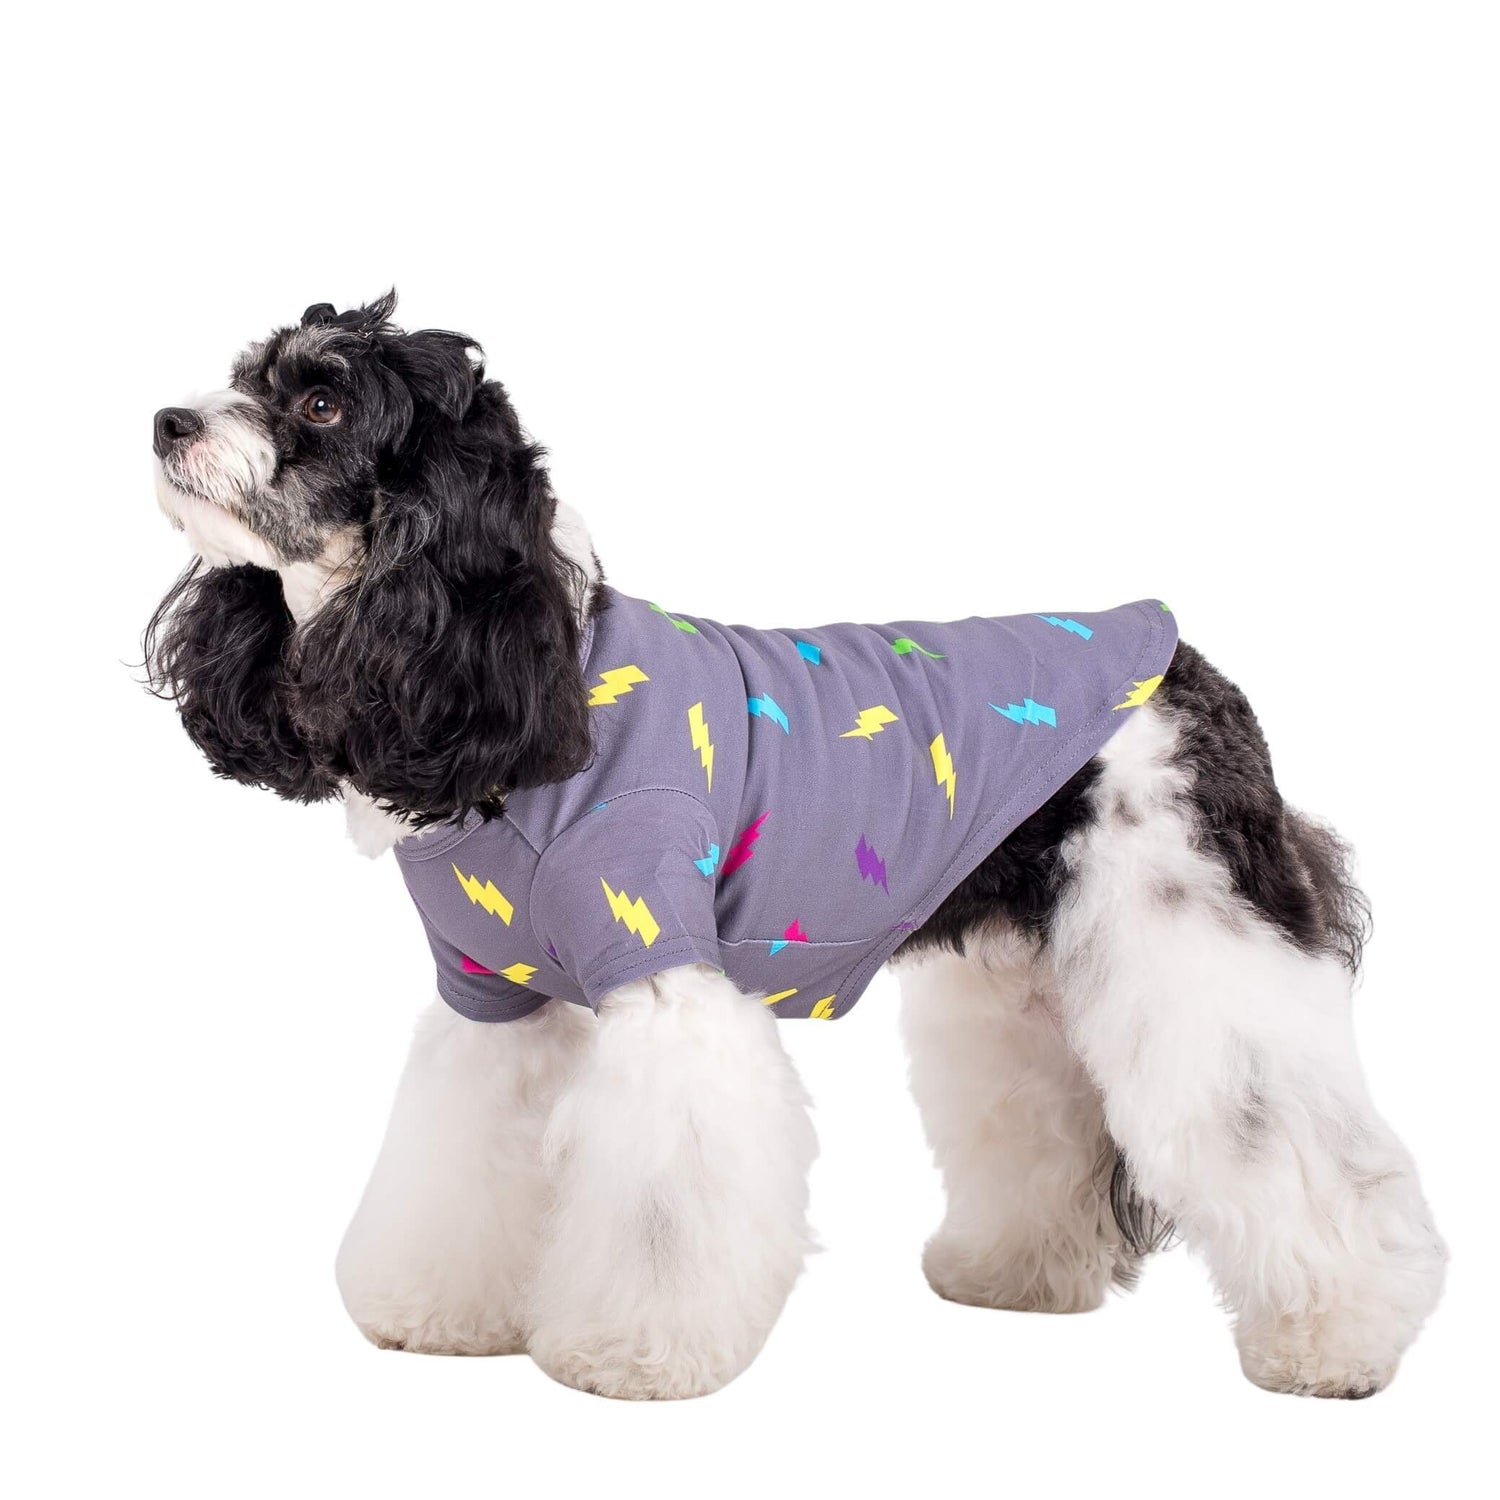 Cavoodle standing side on wearing Vibrant Hound's Electric Energy dog shirt.